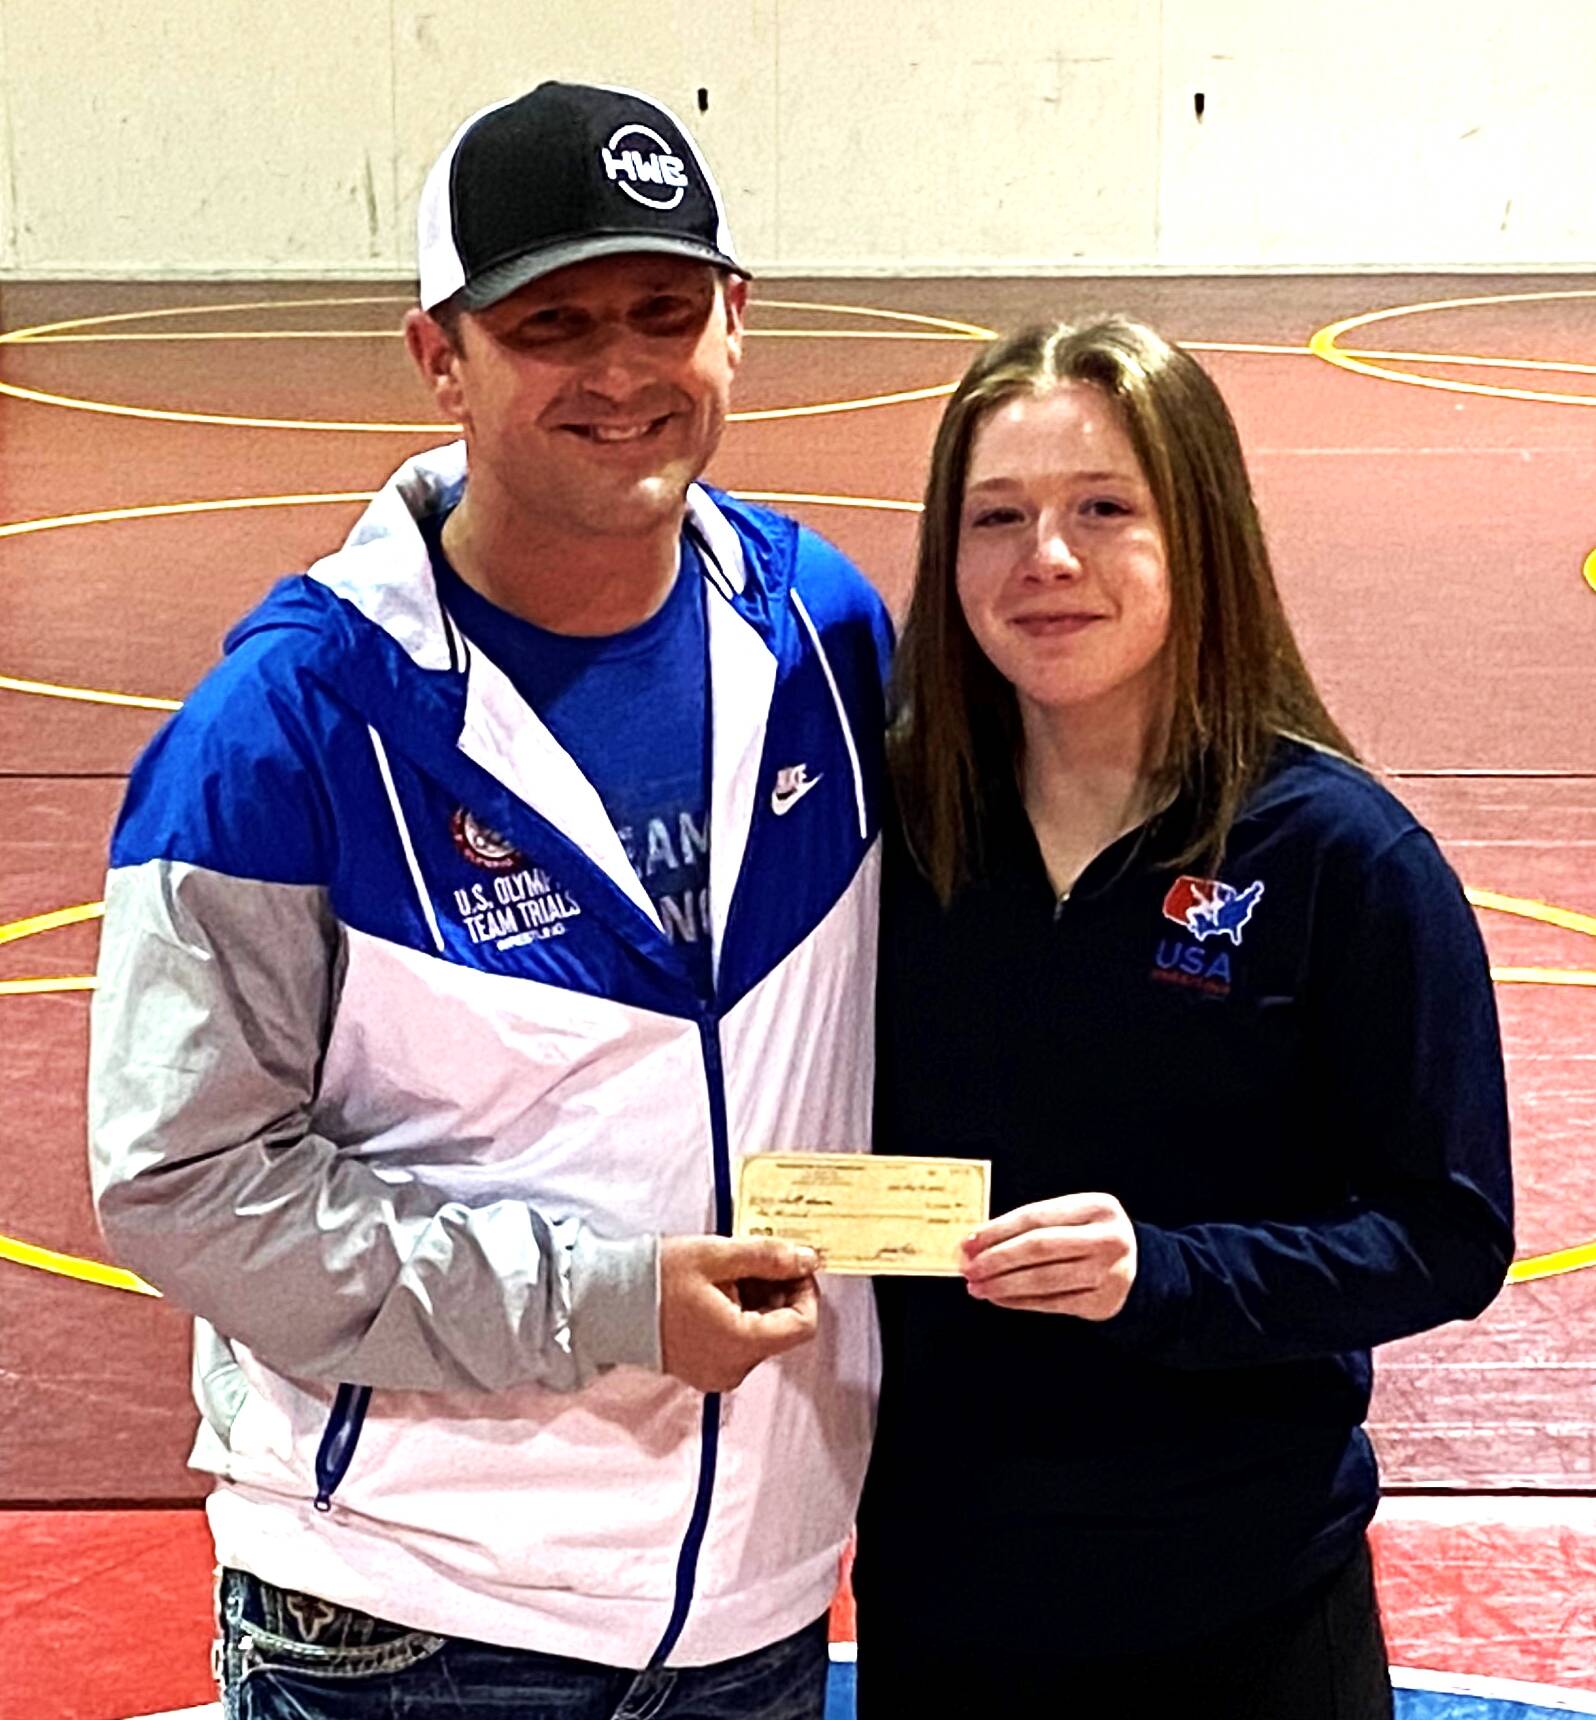 PHOTO BY ED HAWTHORNE
Justin Newby, president of the Washington State Wrestling Association, presented Shelby Moore with a $1,000 check during a ceremony in Buckley.